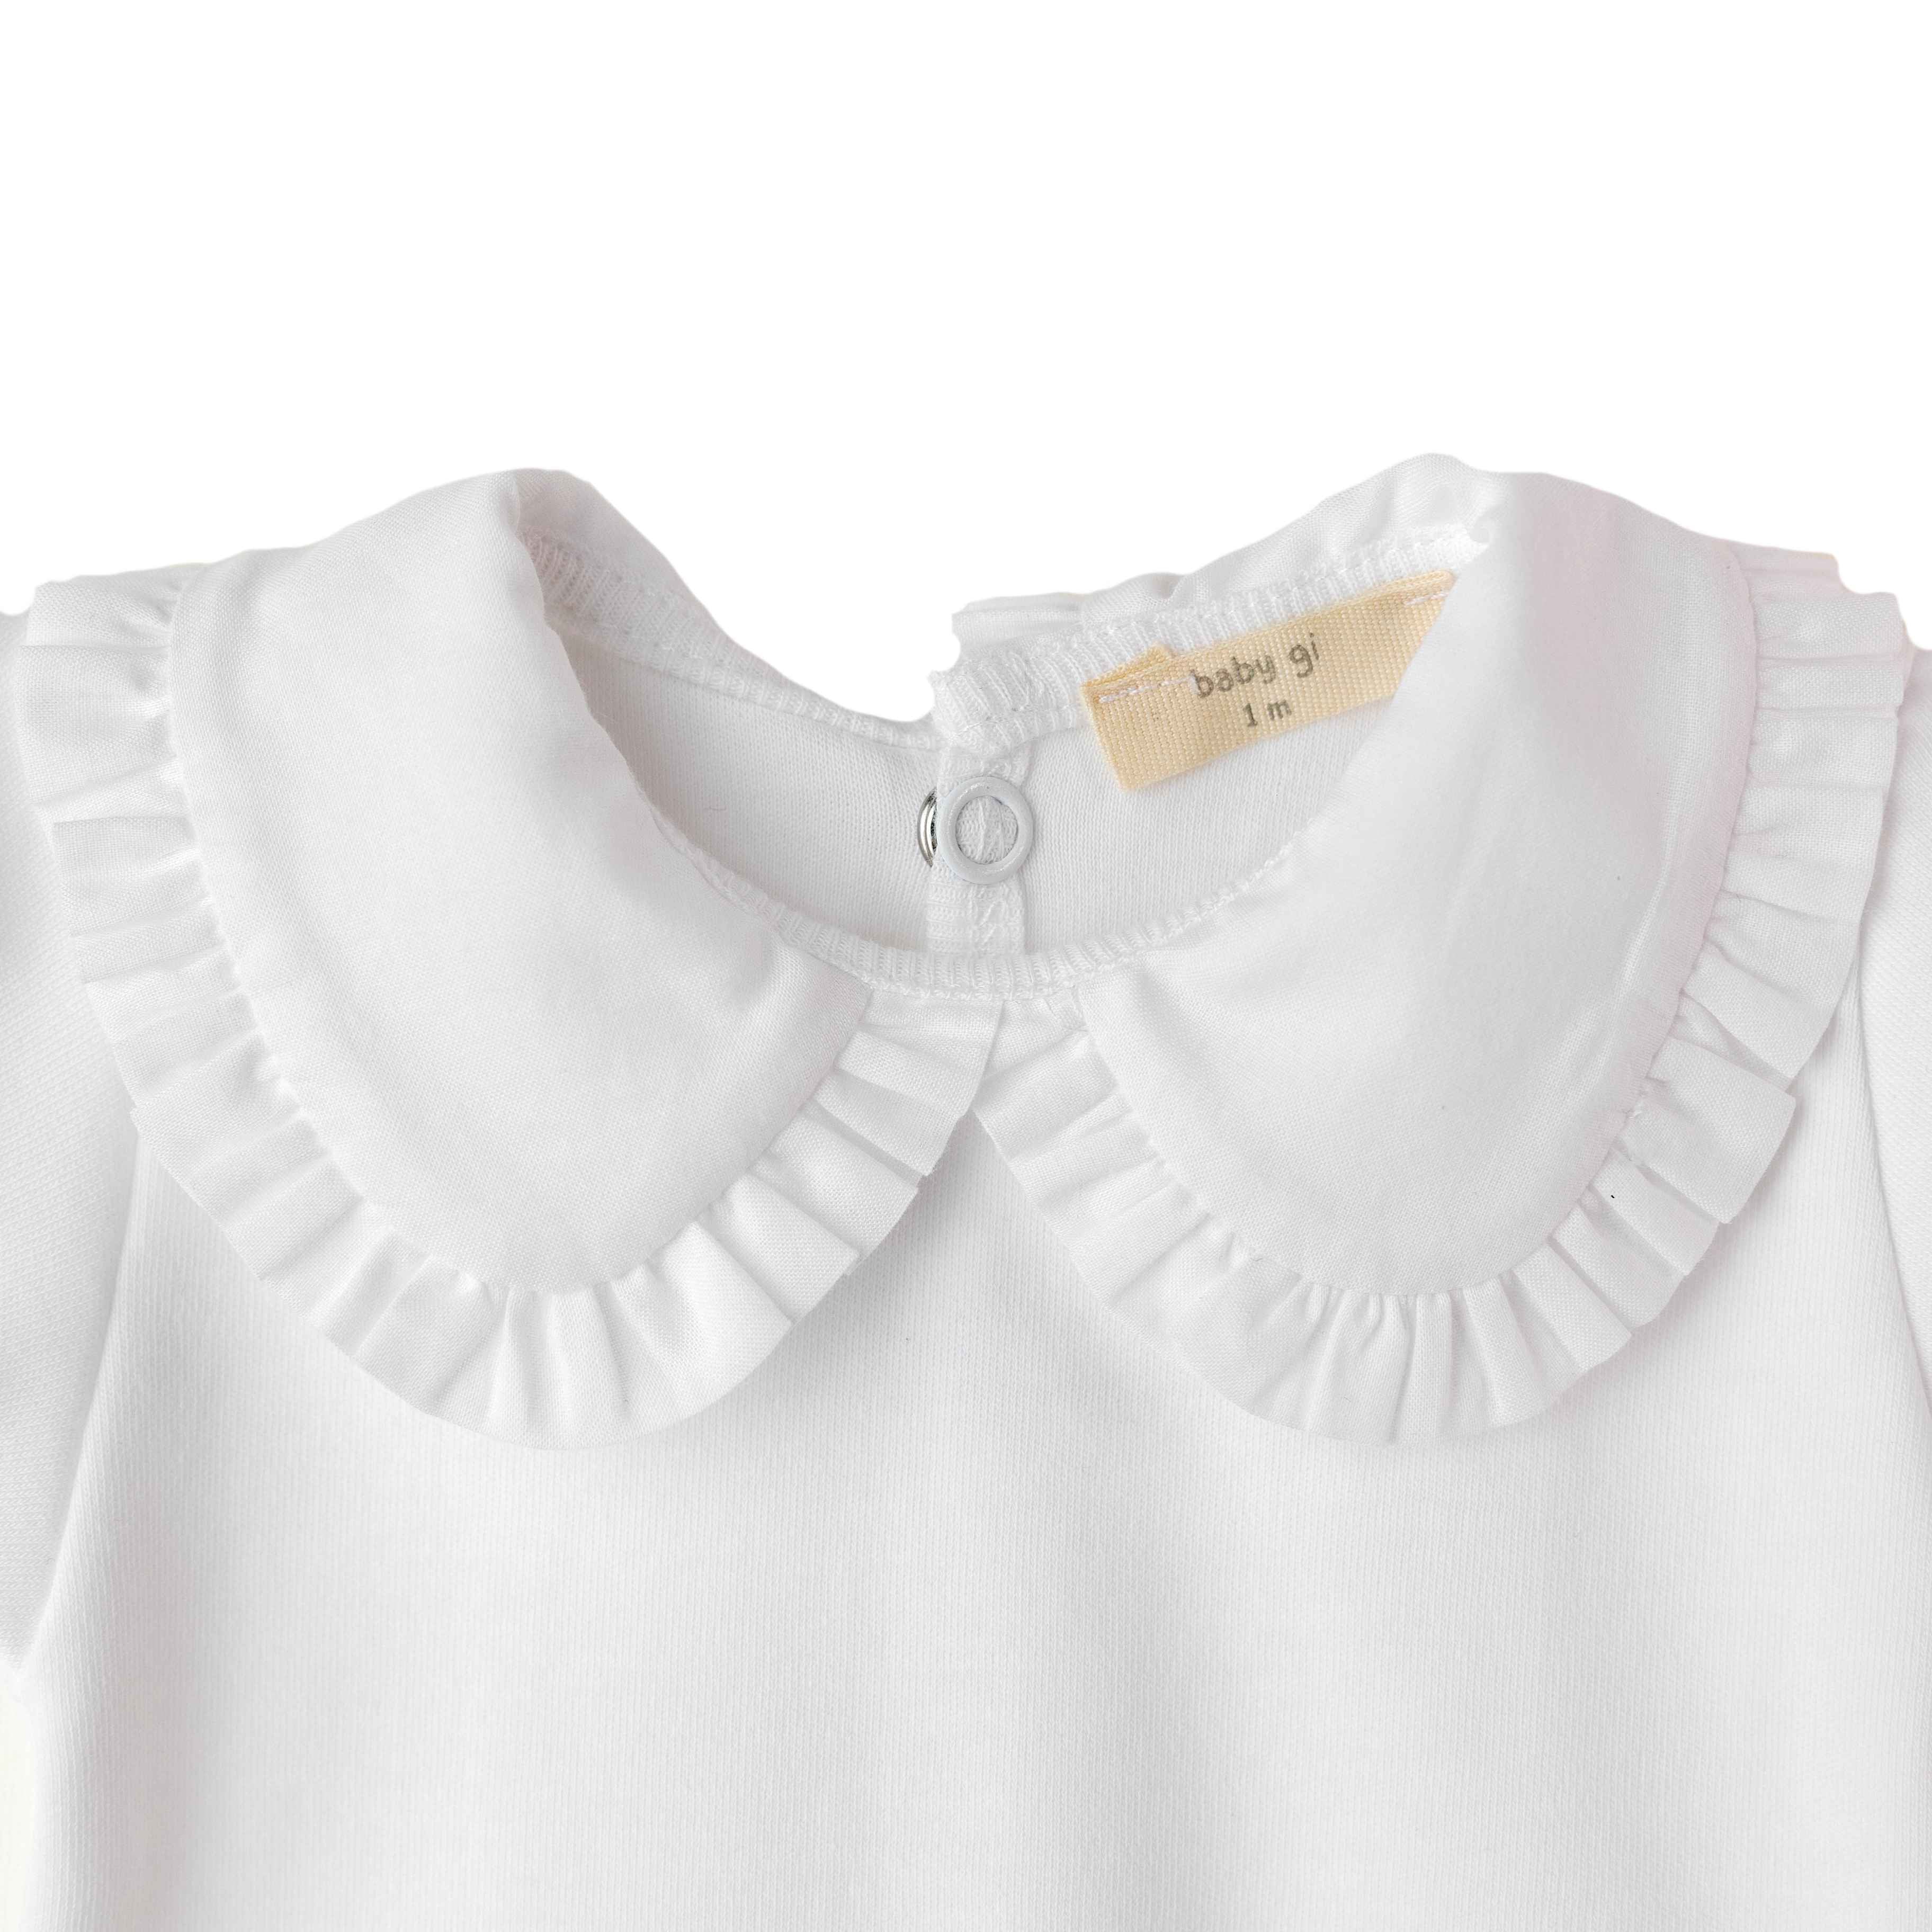 Bodysuit - Shortsleeved with Frilly Collar - Baby Gi